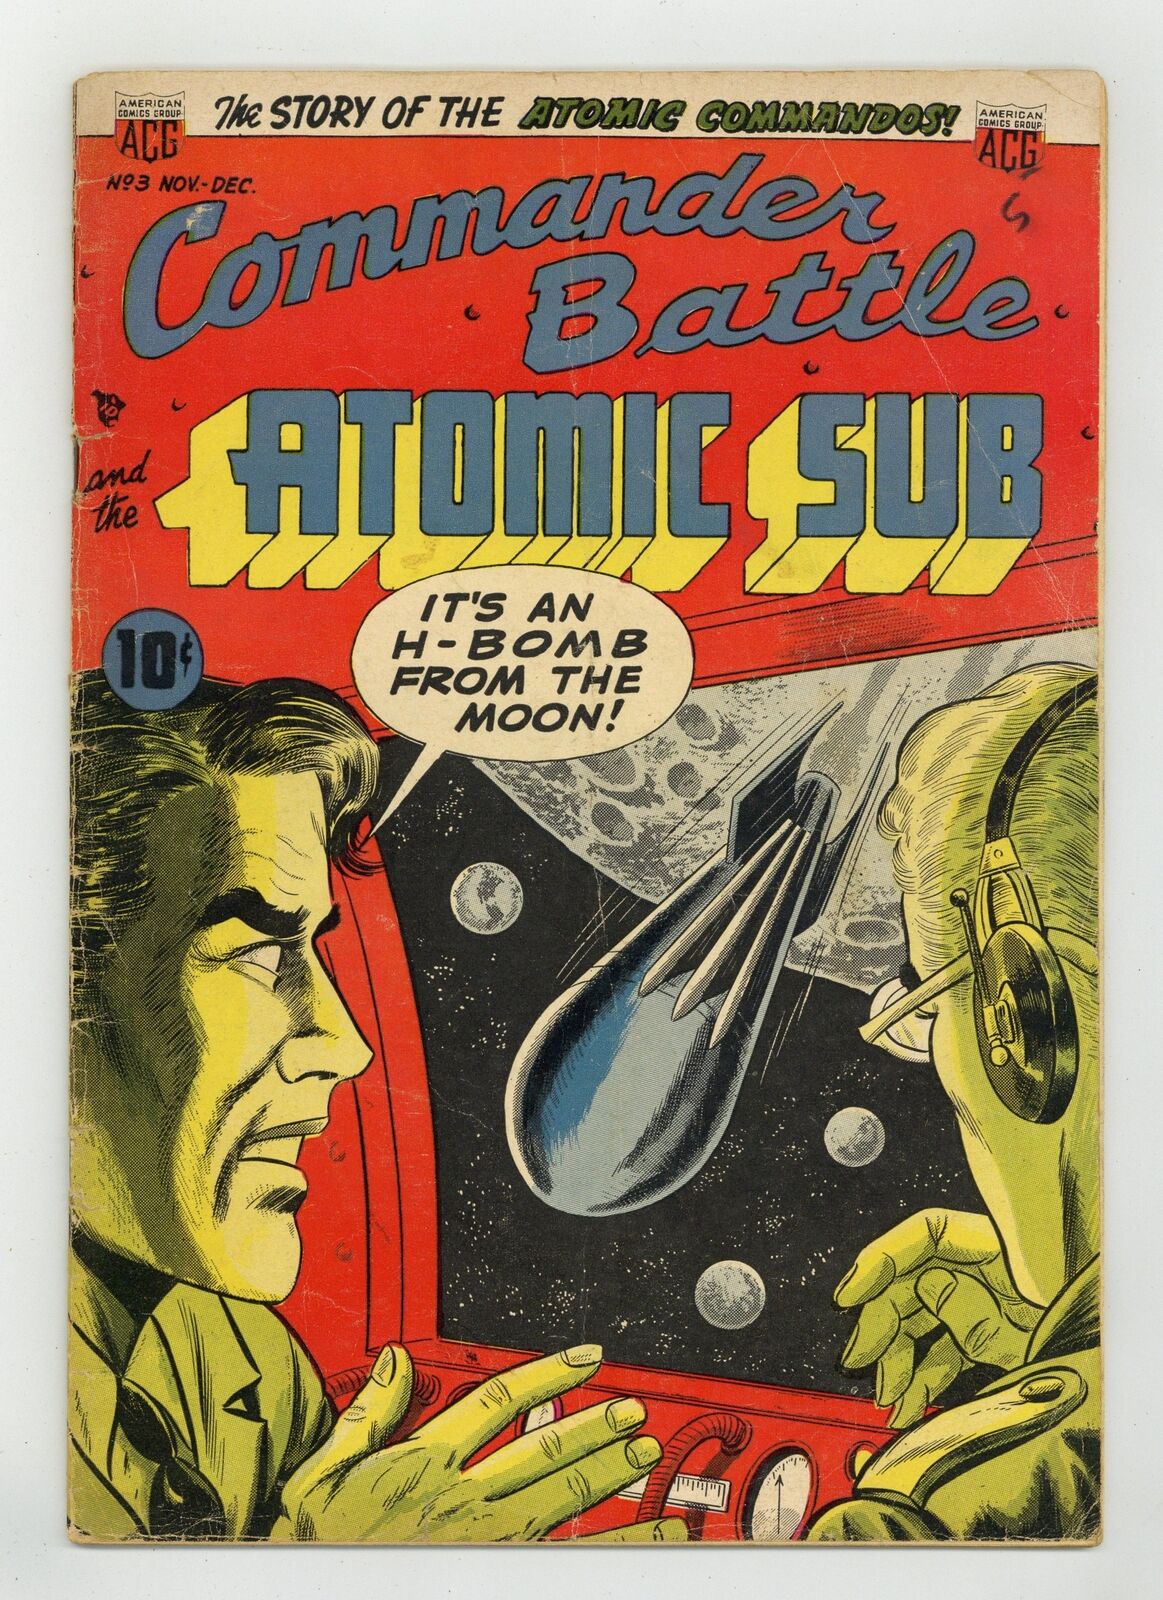 Commander Battle and the Atomic Sub #3 GD/VG 3.0 1954